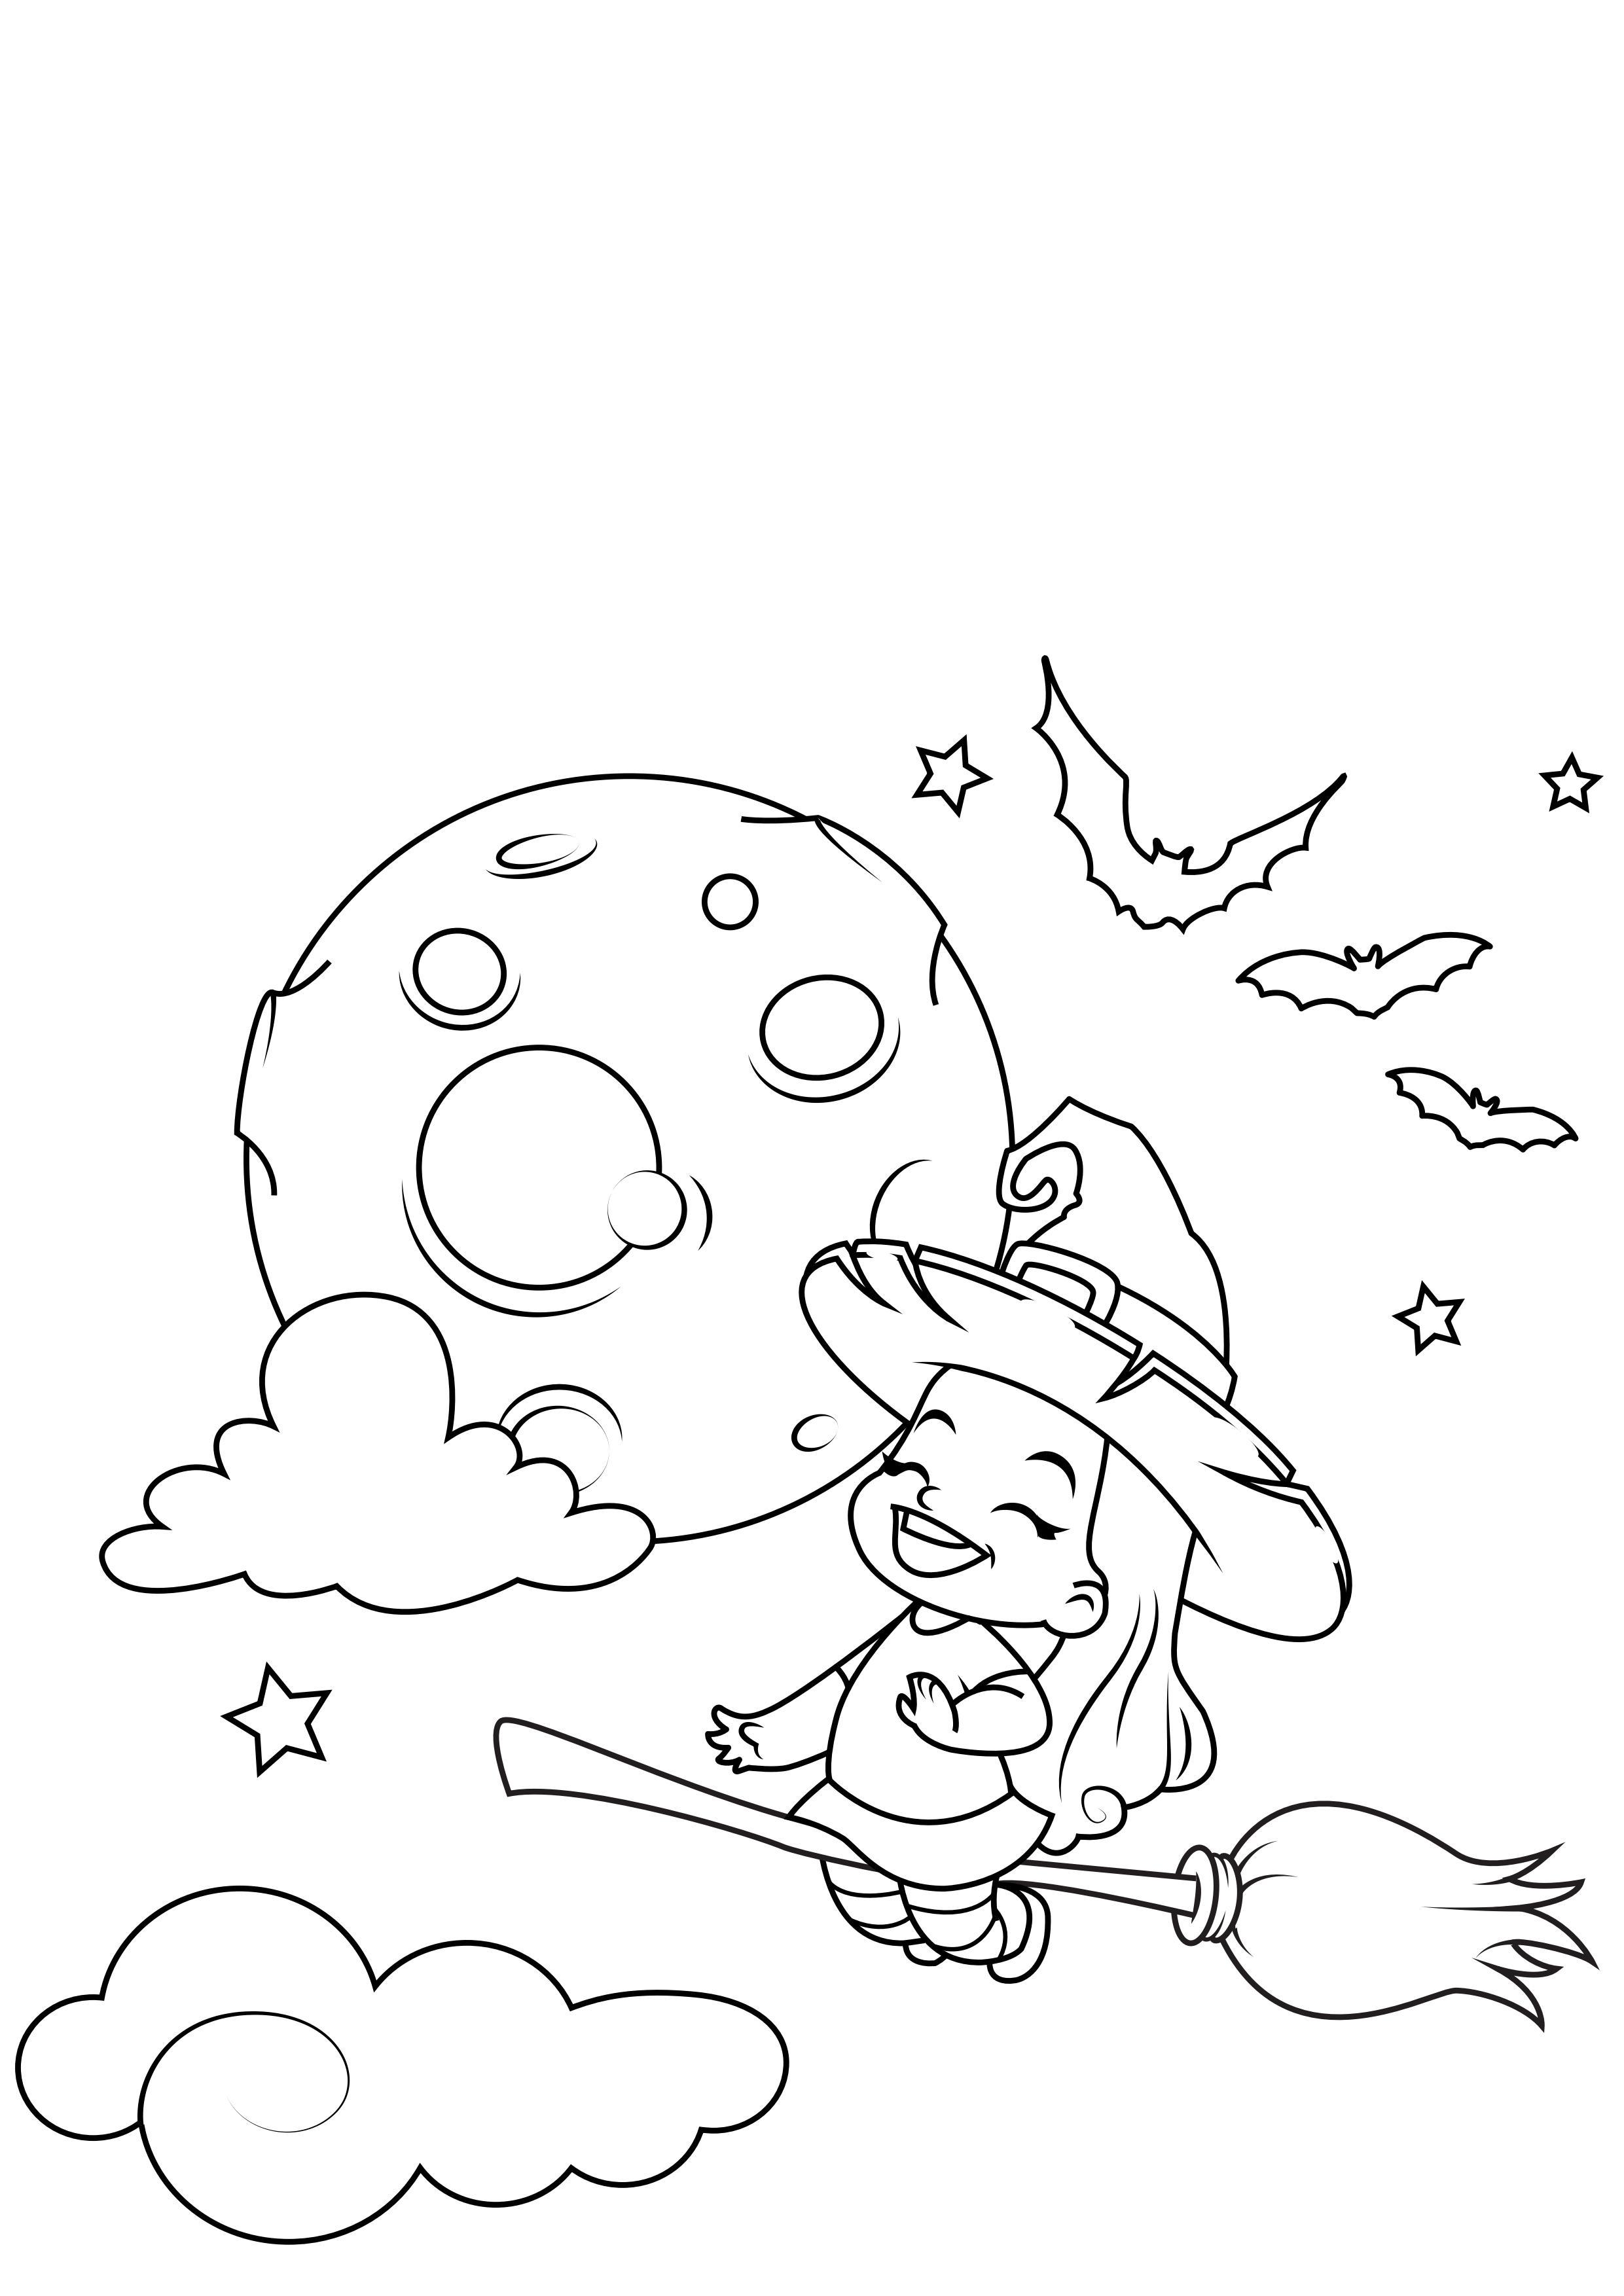 Coloring page Halloween witch